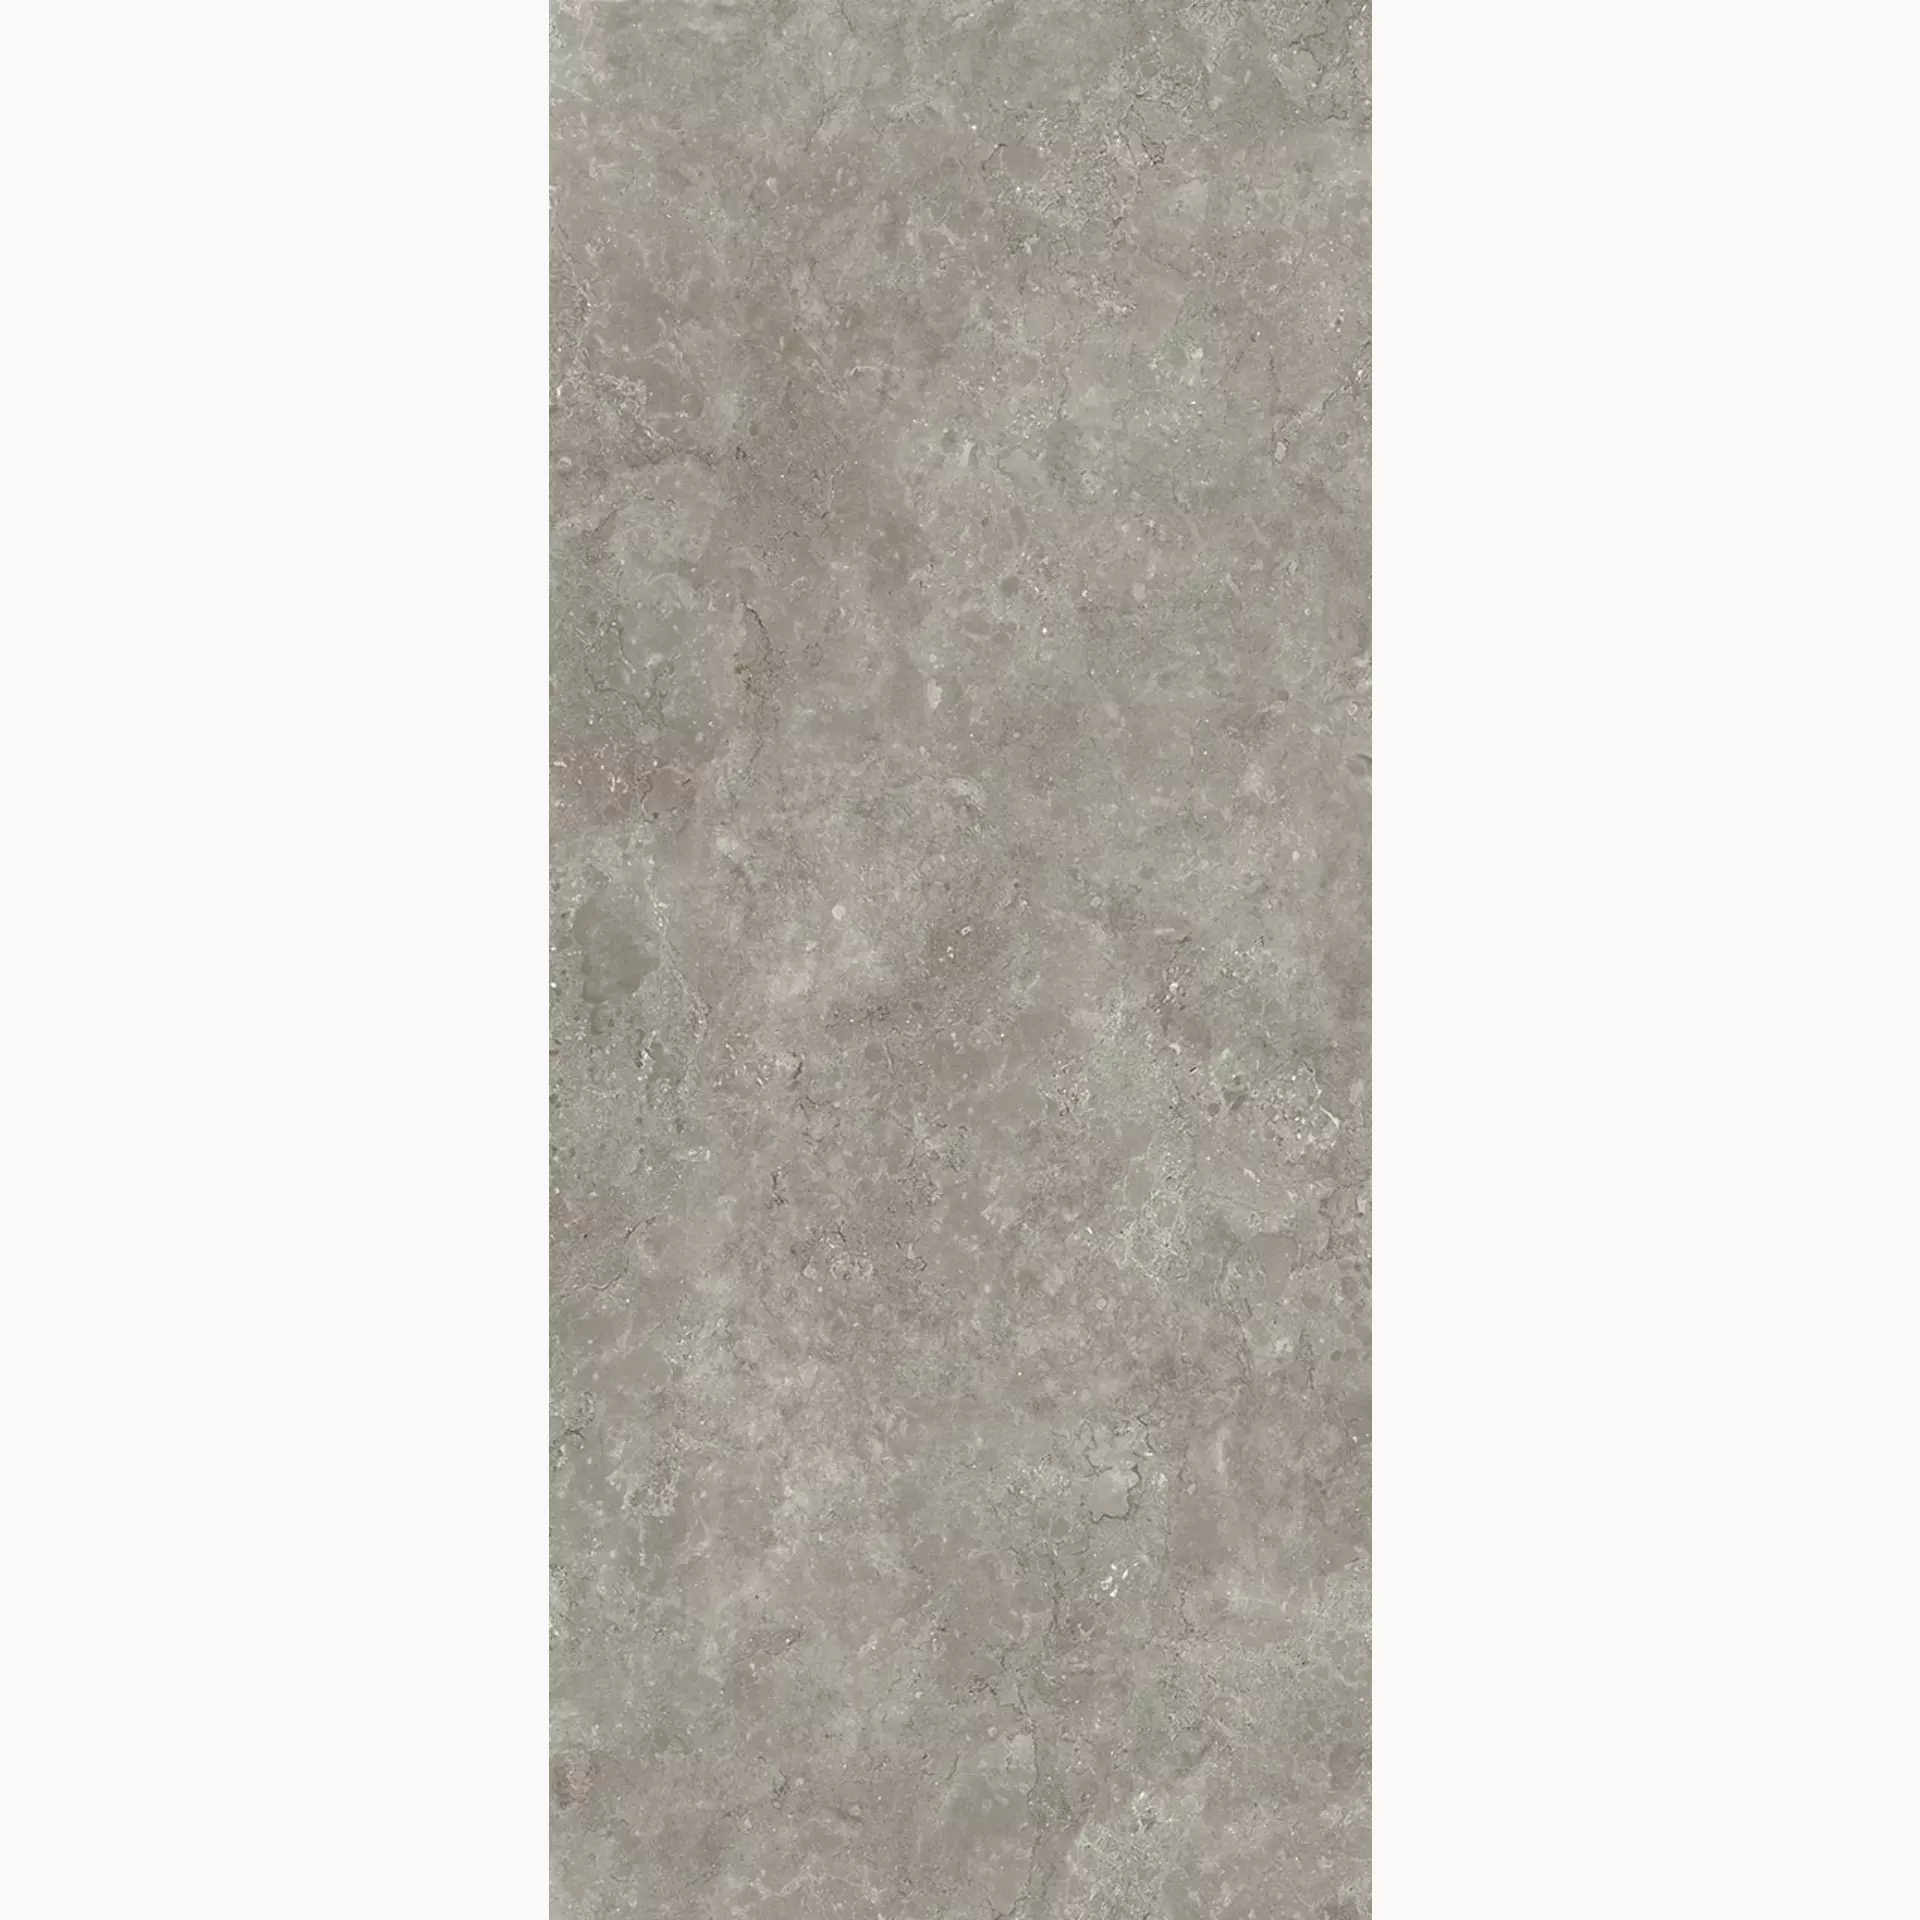 Coem Wide Gres Light Grey Naturale Lagos 0OS123R 120x120cm rectified 6mm